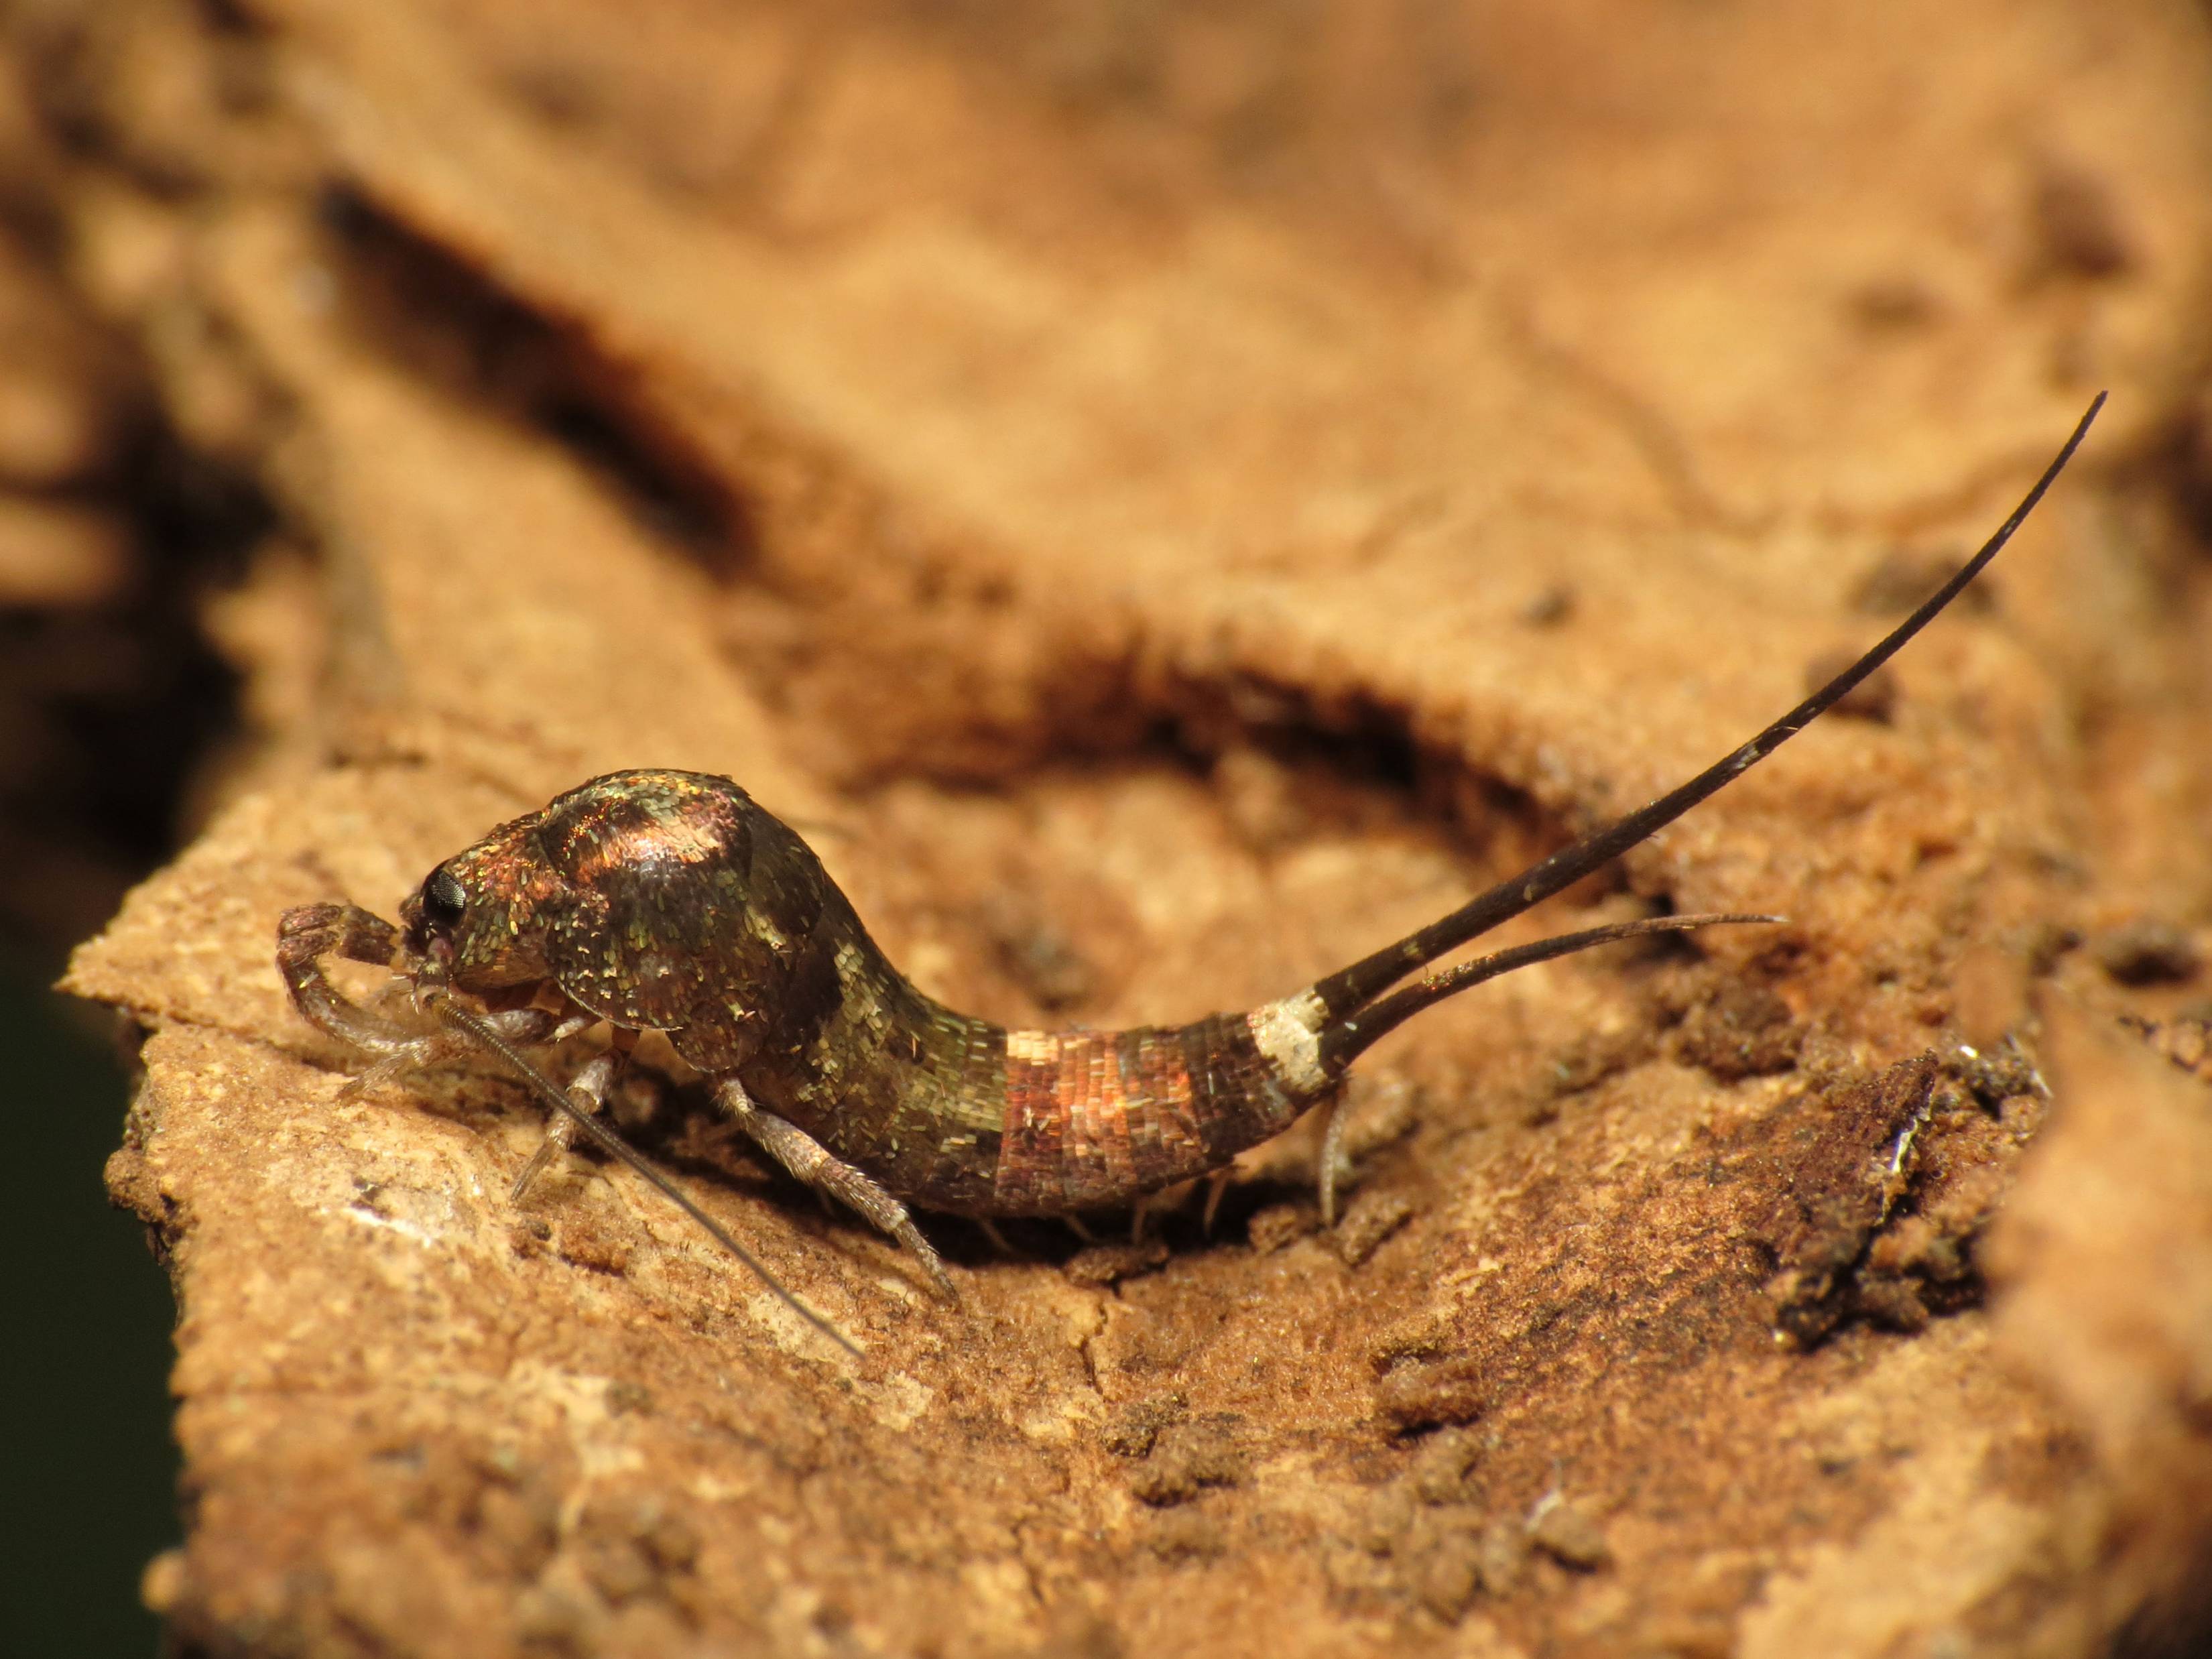 The jumping bristletail stands on a dirty surface with long legs and antennae 